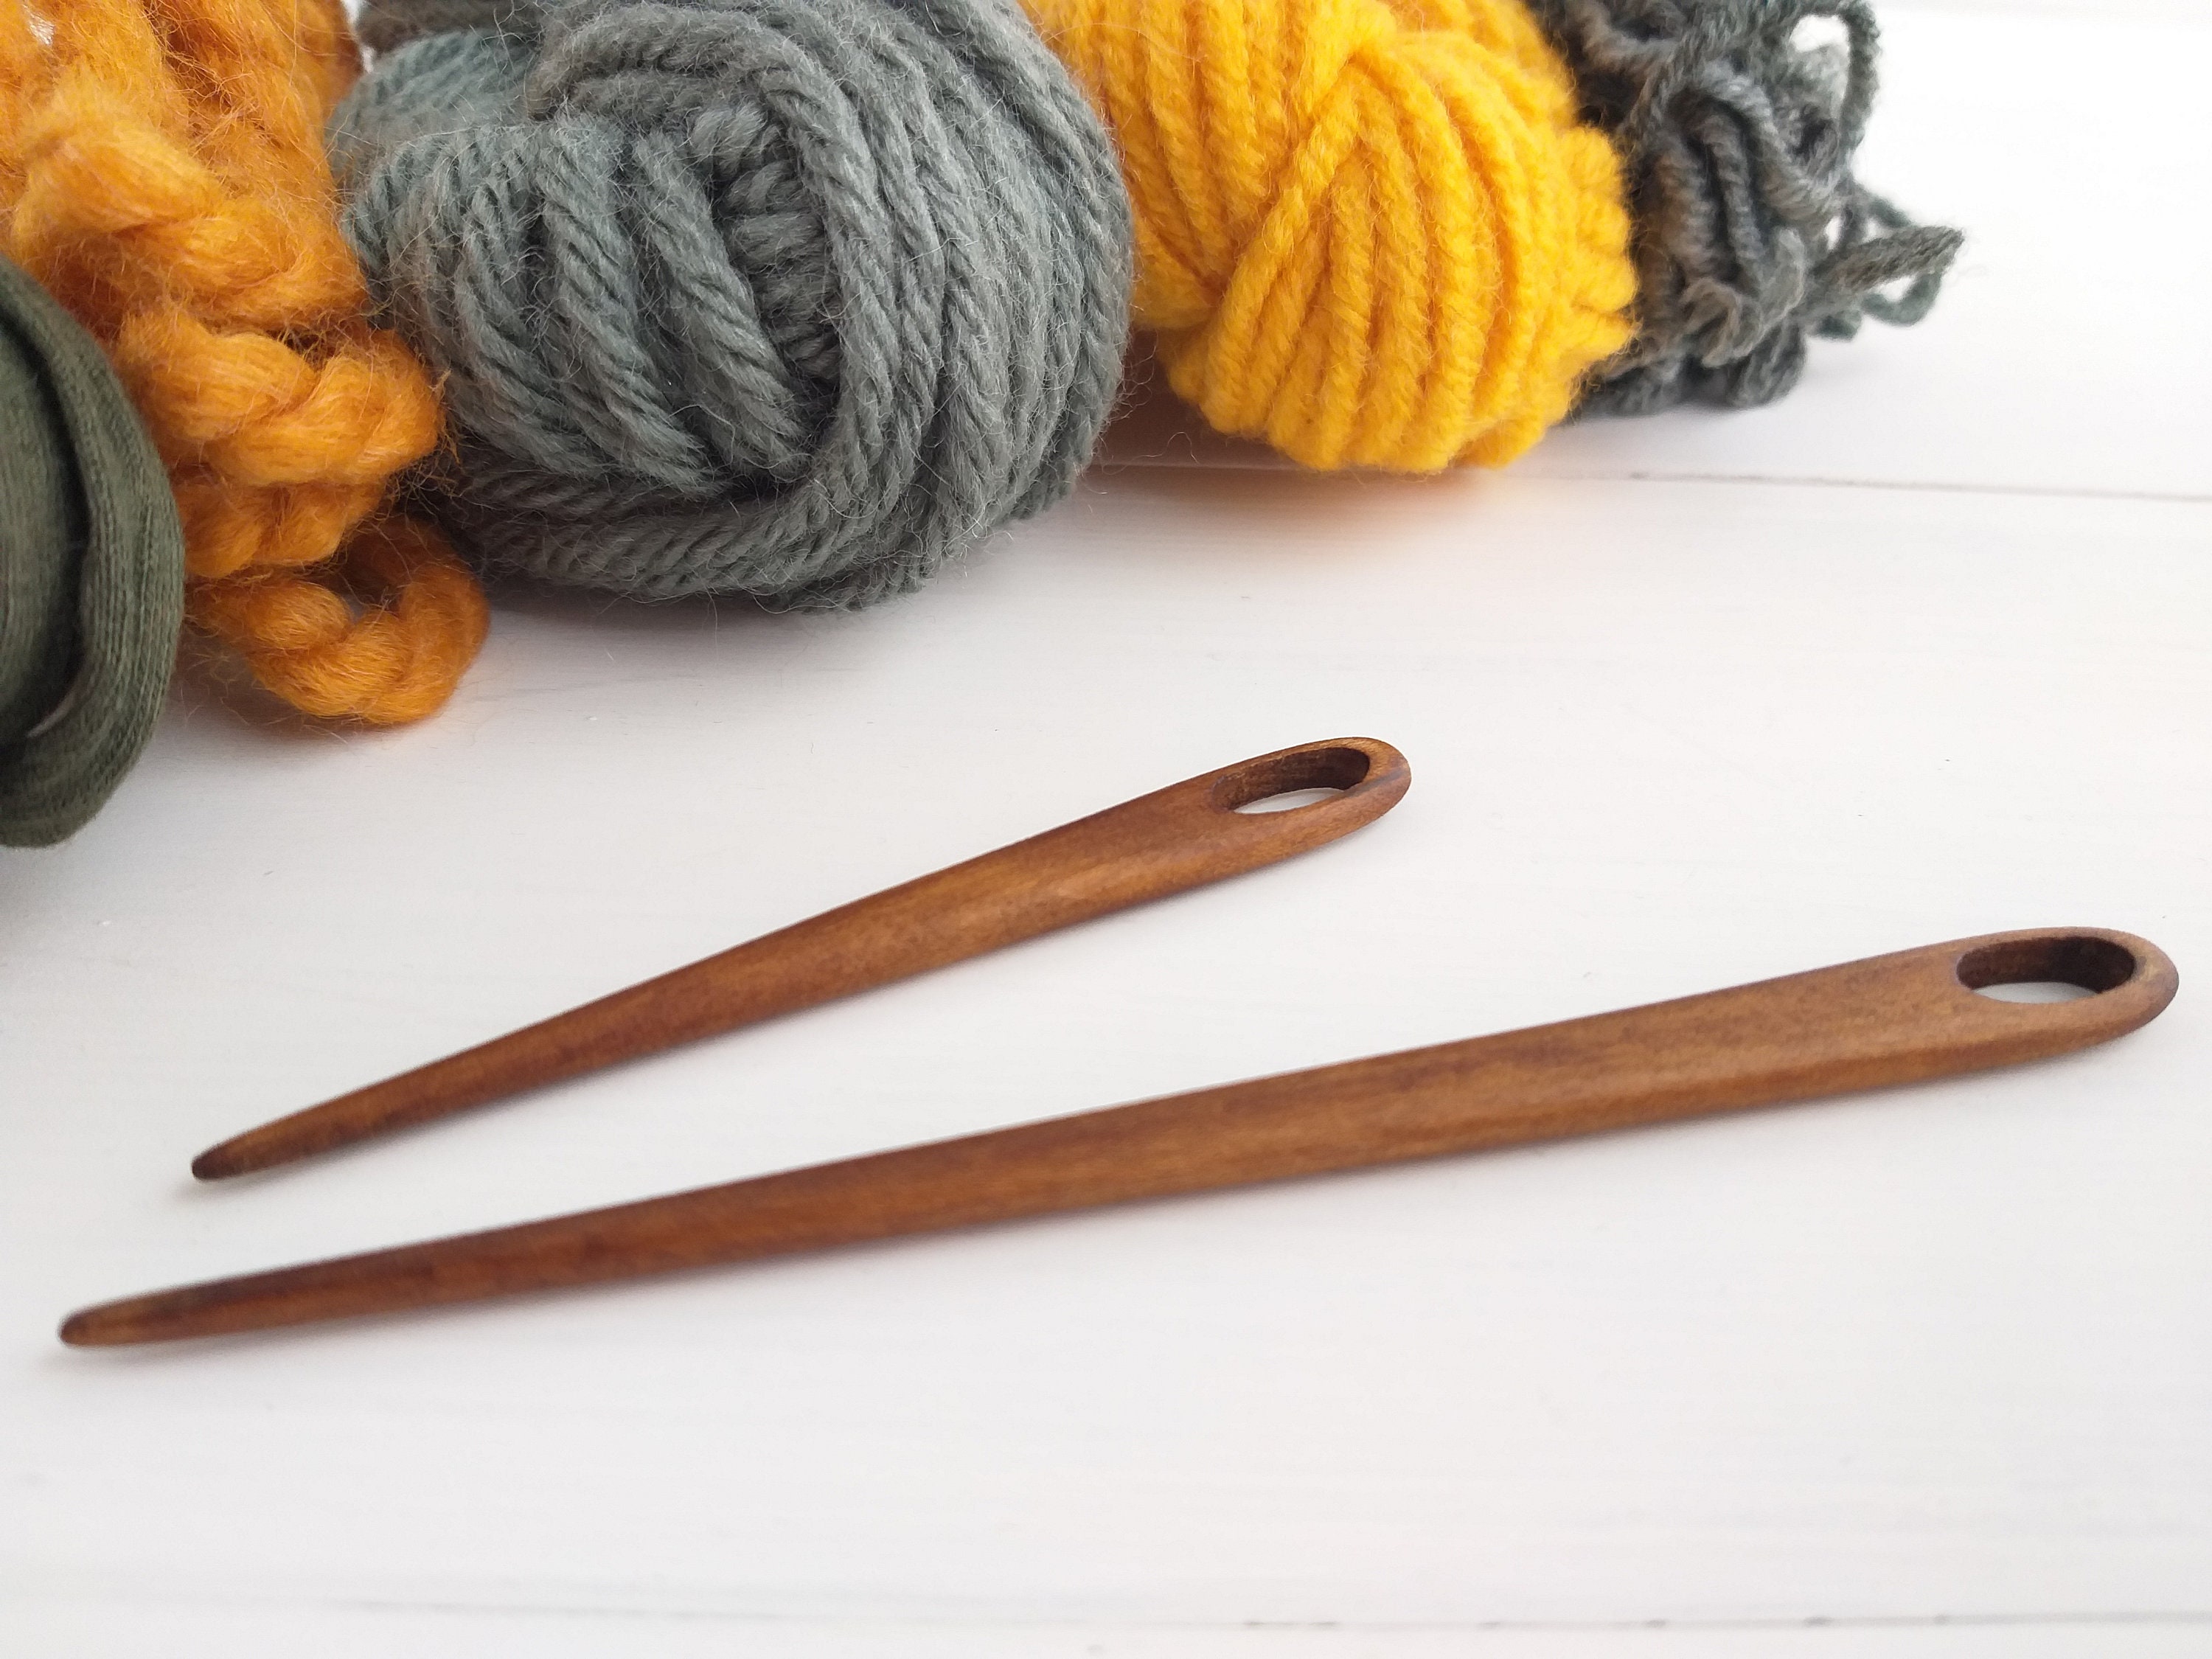 Handmade Tapestry Needles / Handcrafted Wooden Tapestry Needles